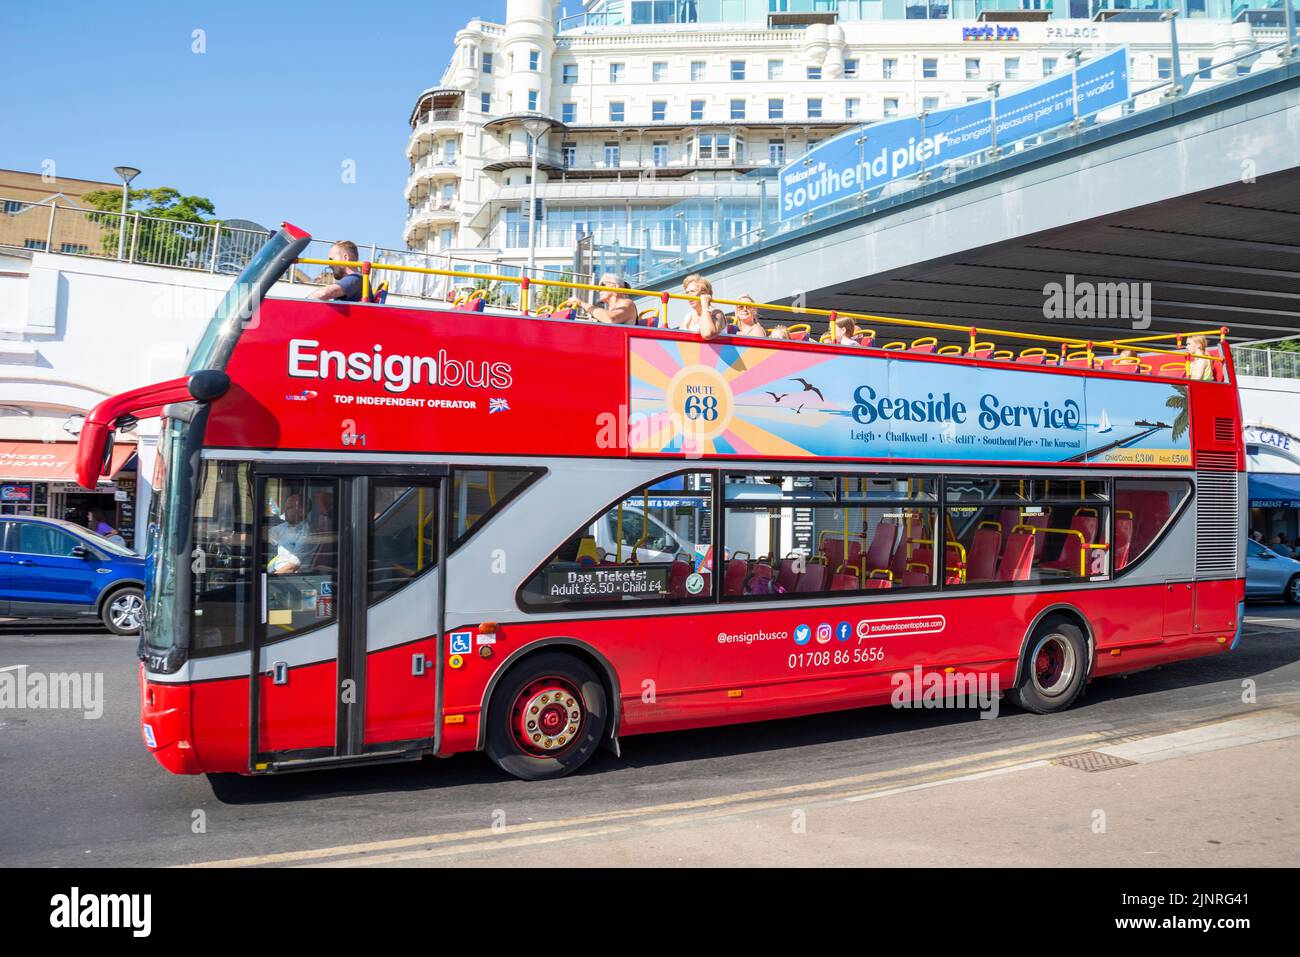 EnsignBus open top bus service in Southend on Sea, Essex, UK. Seaside Service Route 68, passing under Southend Pier, below Park Inn Palace hotel Stock Photo